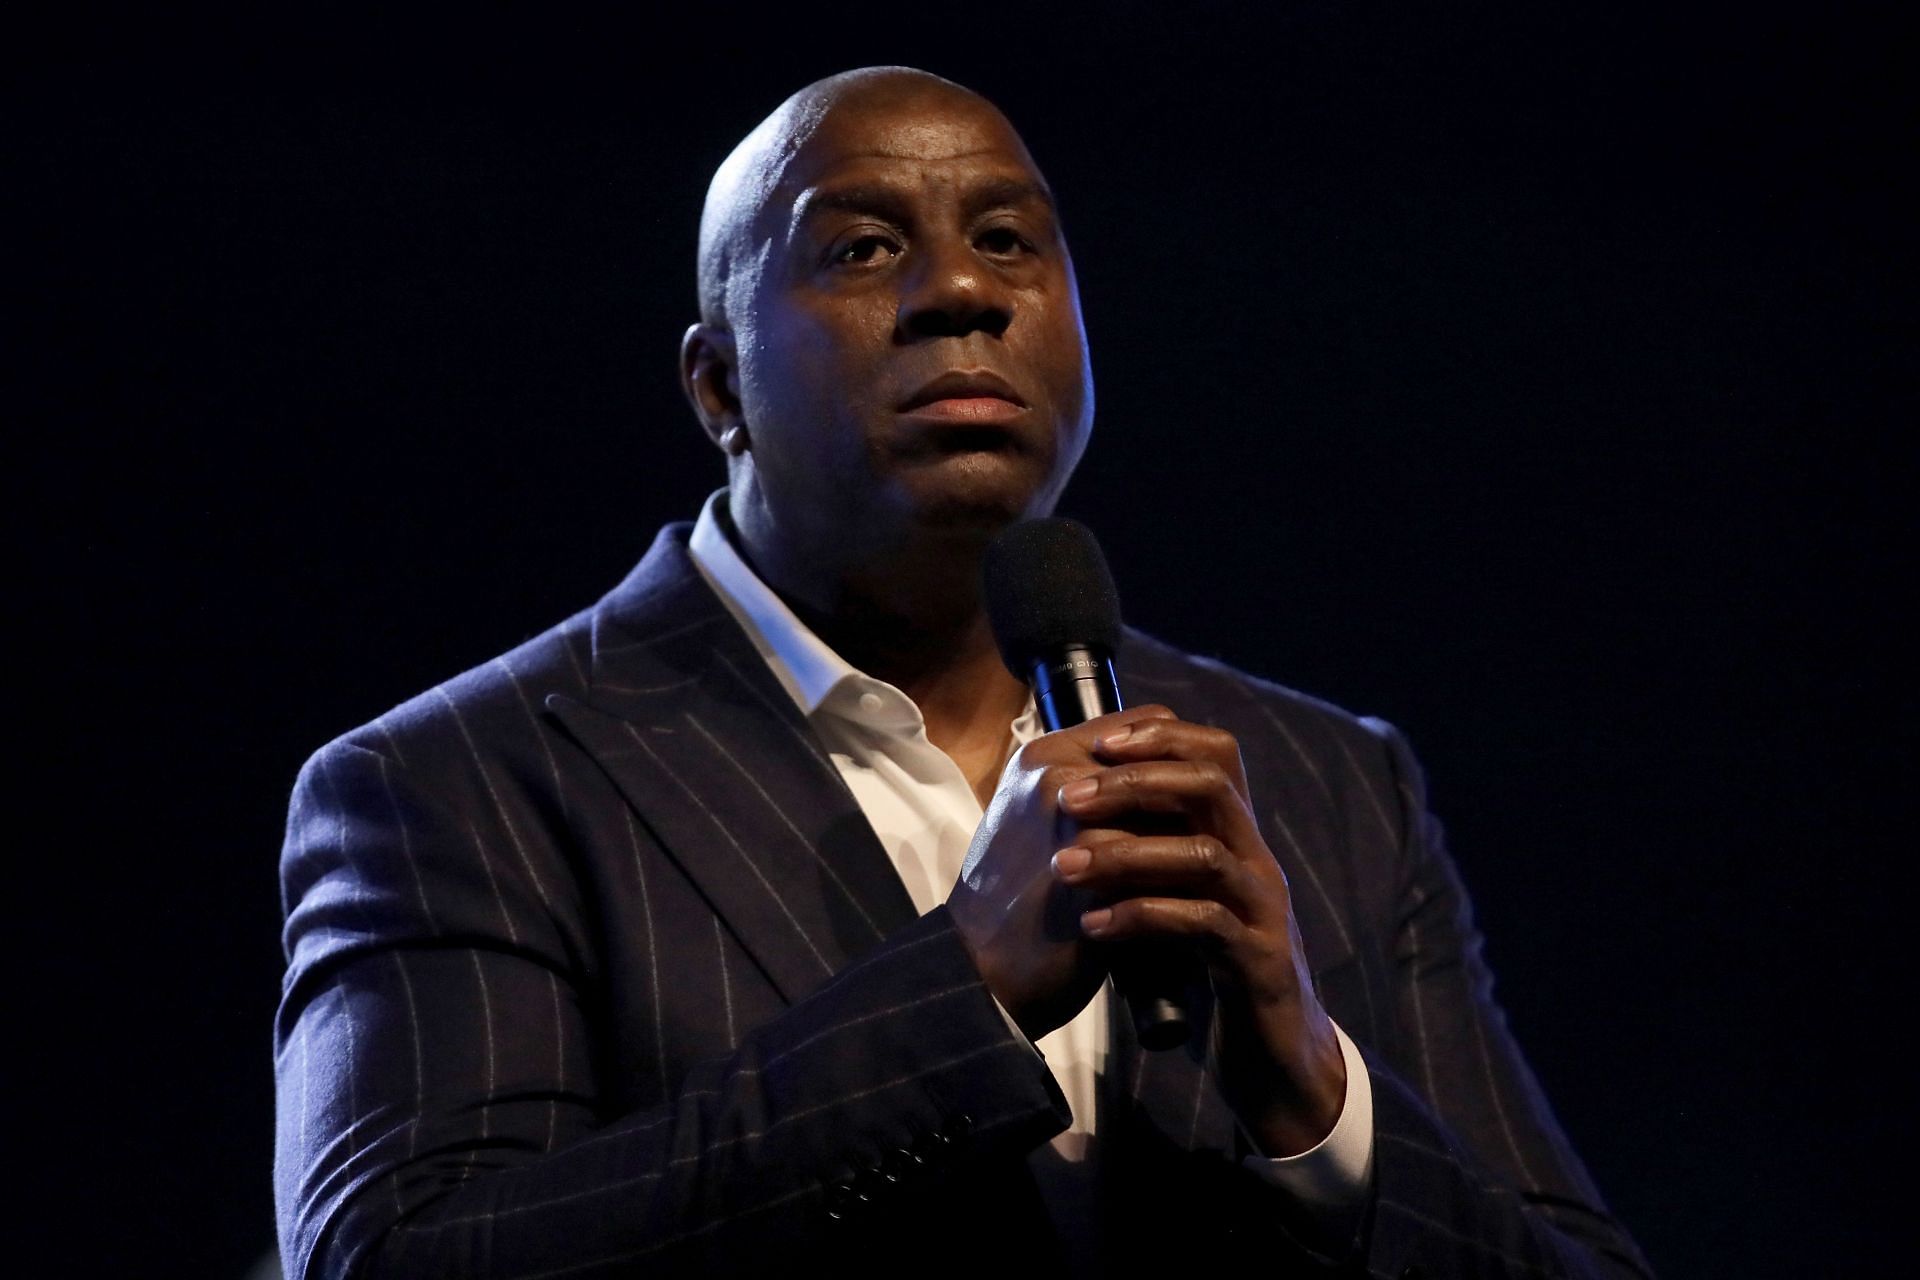 NBA legend Magic joins 76ers co-owner Josh Harris and his group to purchase the Broncos